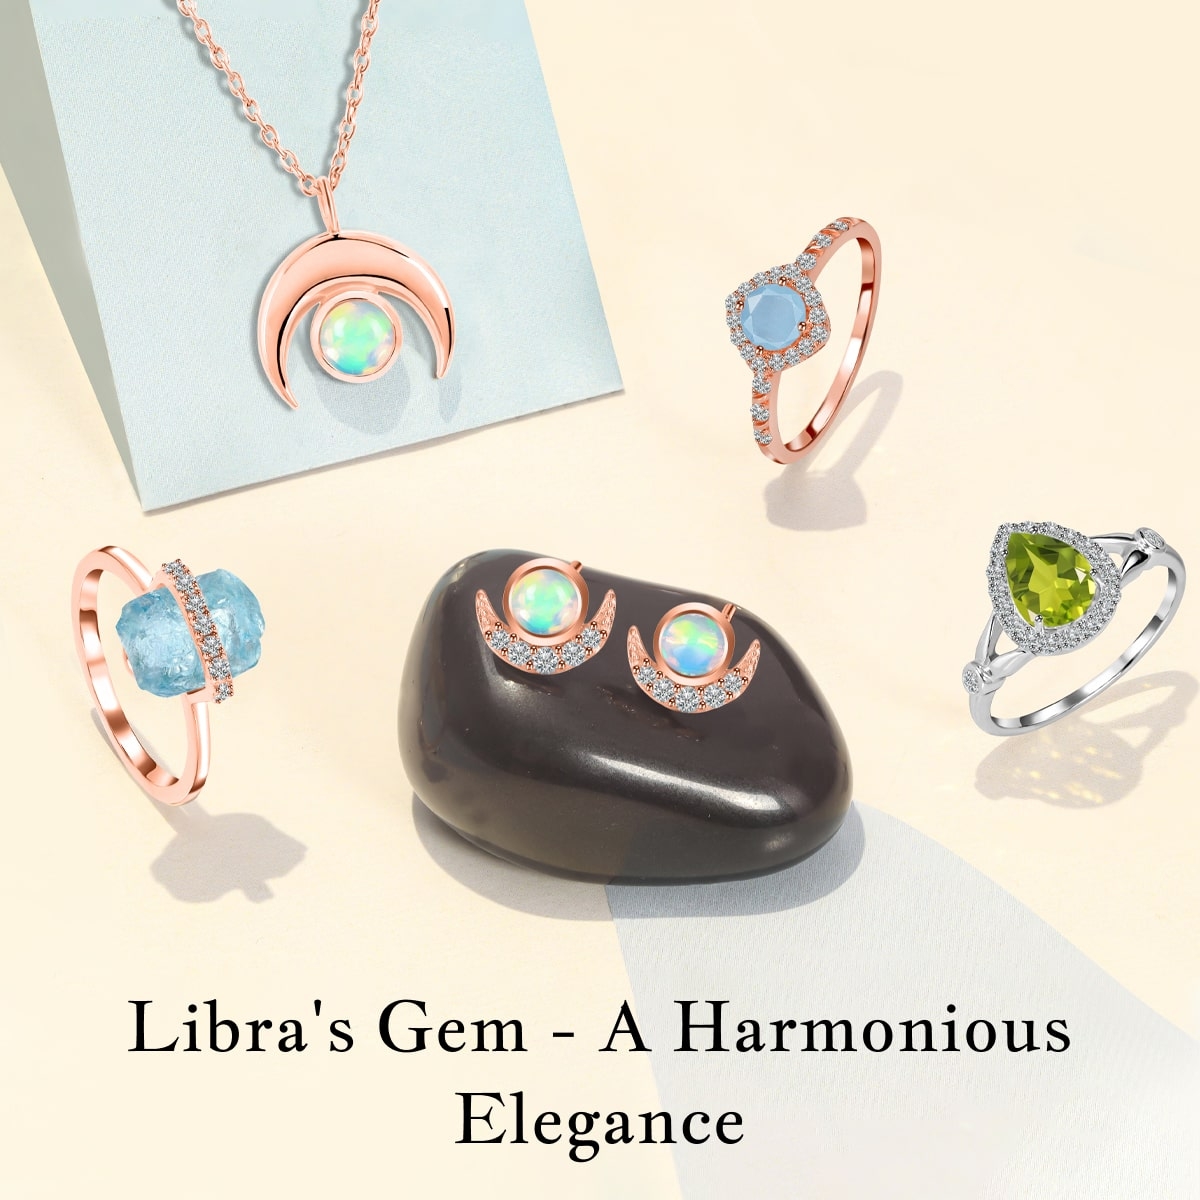 Benefits of Wearing These Birthstone